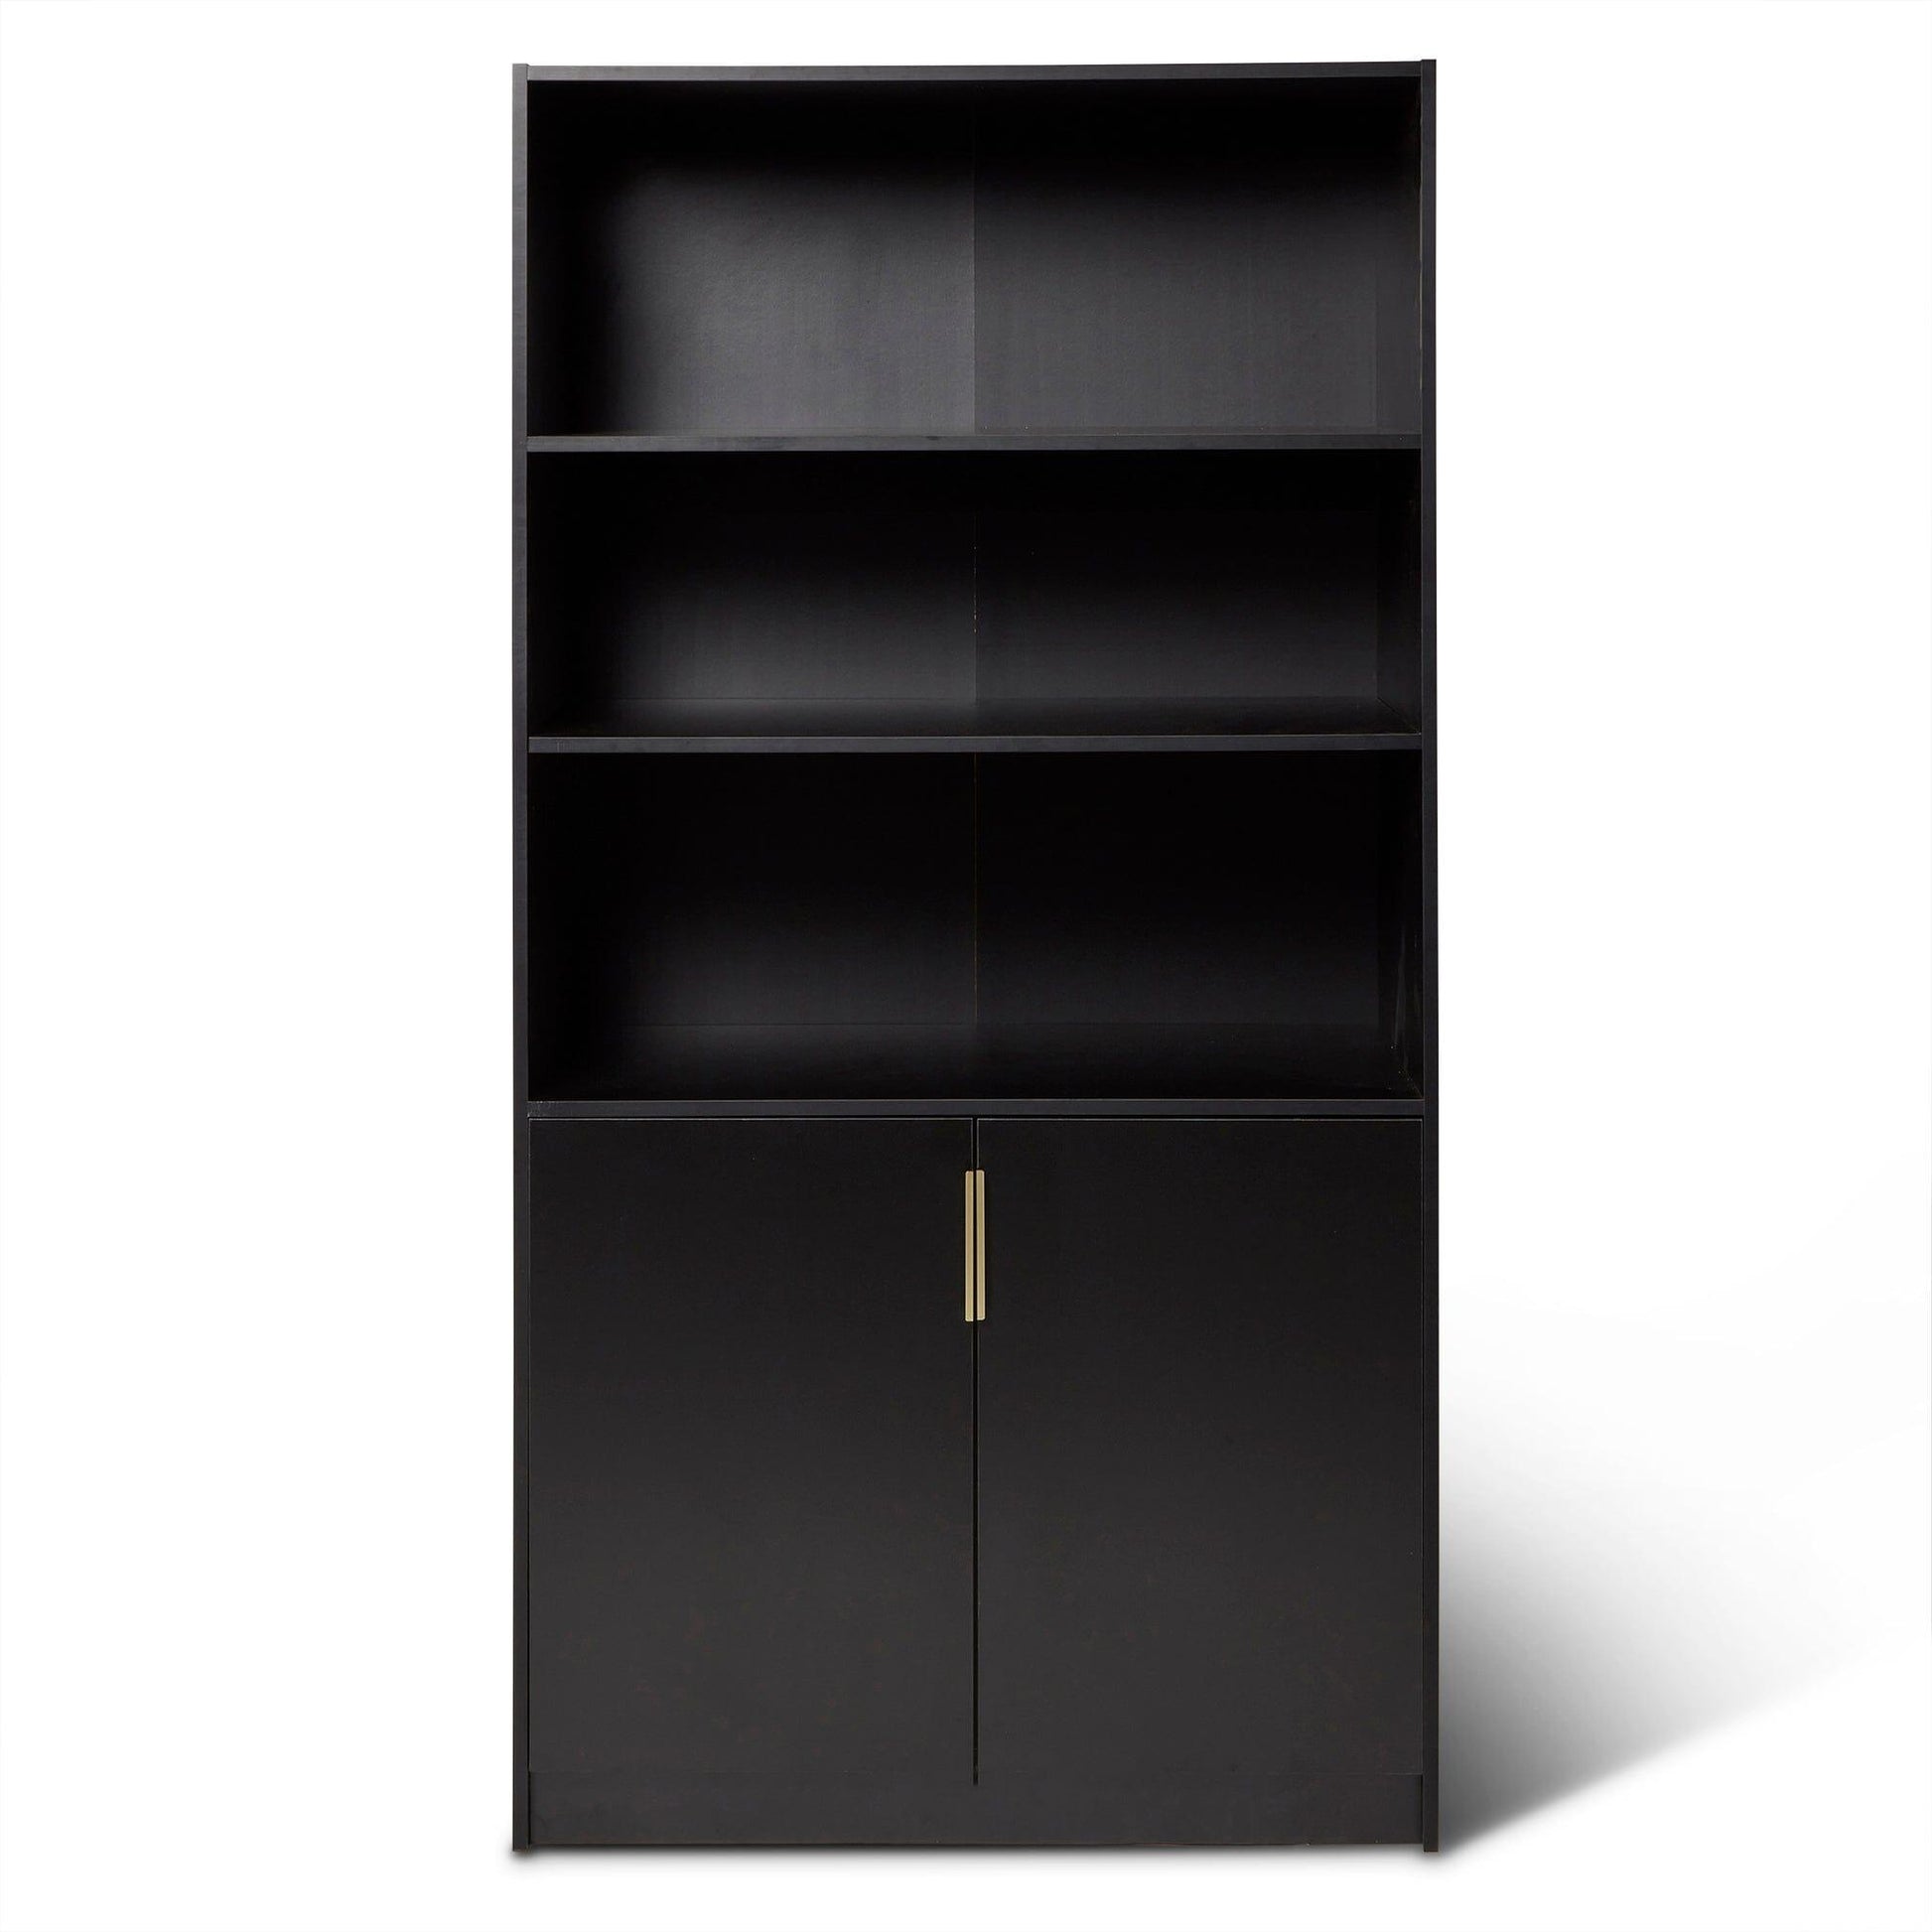 Essie Tall Black Bookcase with Gold Handles - Laura James